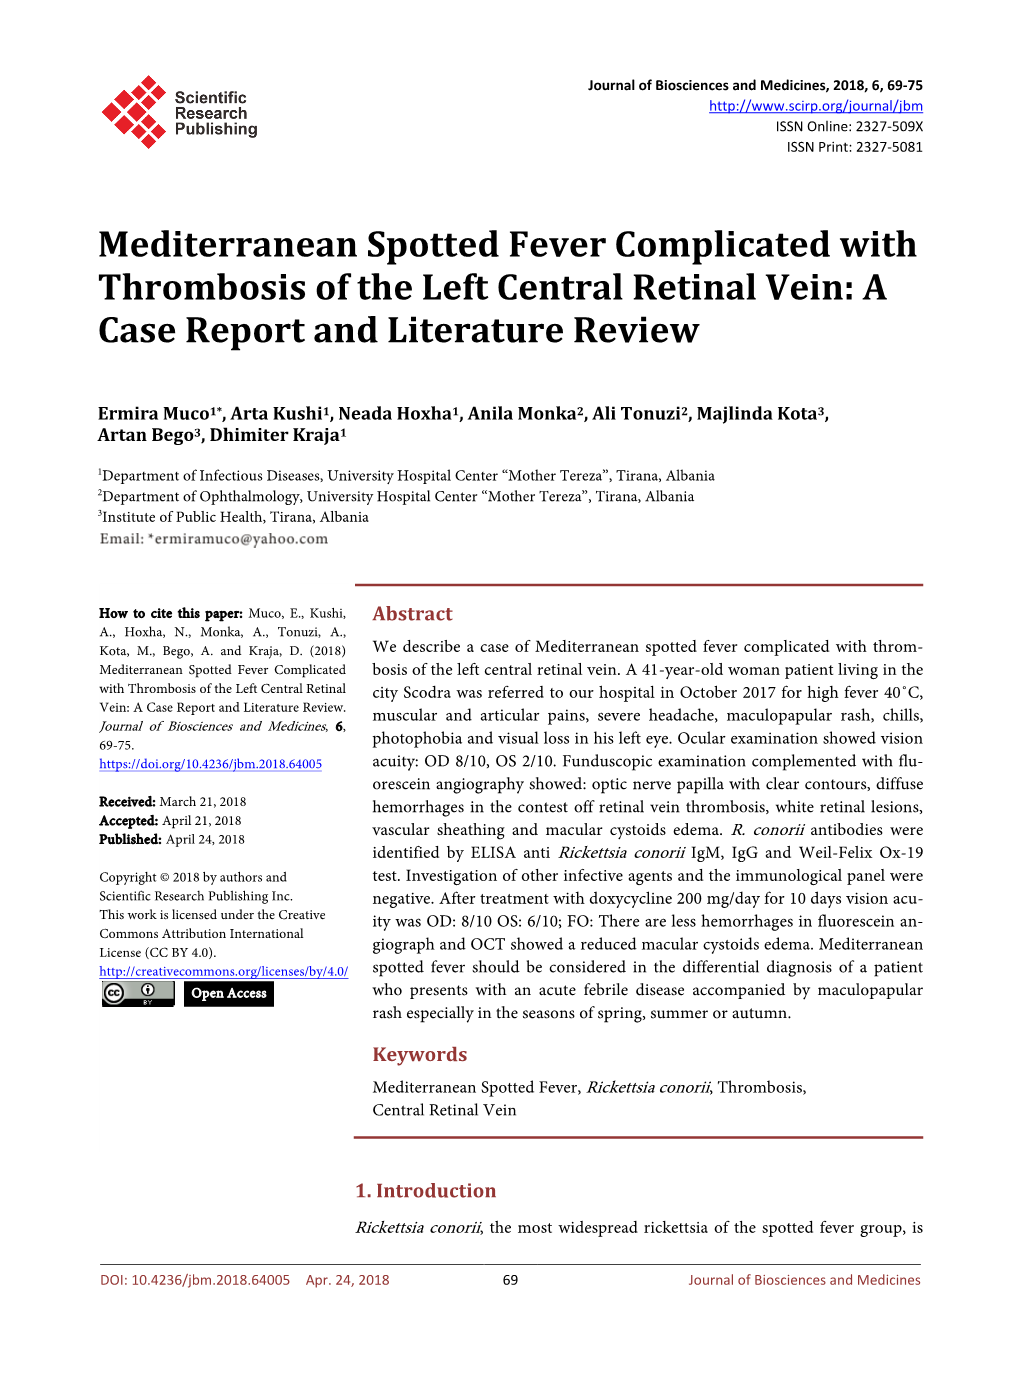 Mediterranean Spotted Fever Complicated with Thrombosis of the Left Central Retinal Vein: a Case Report and Literature Review